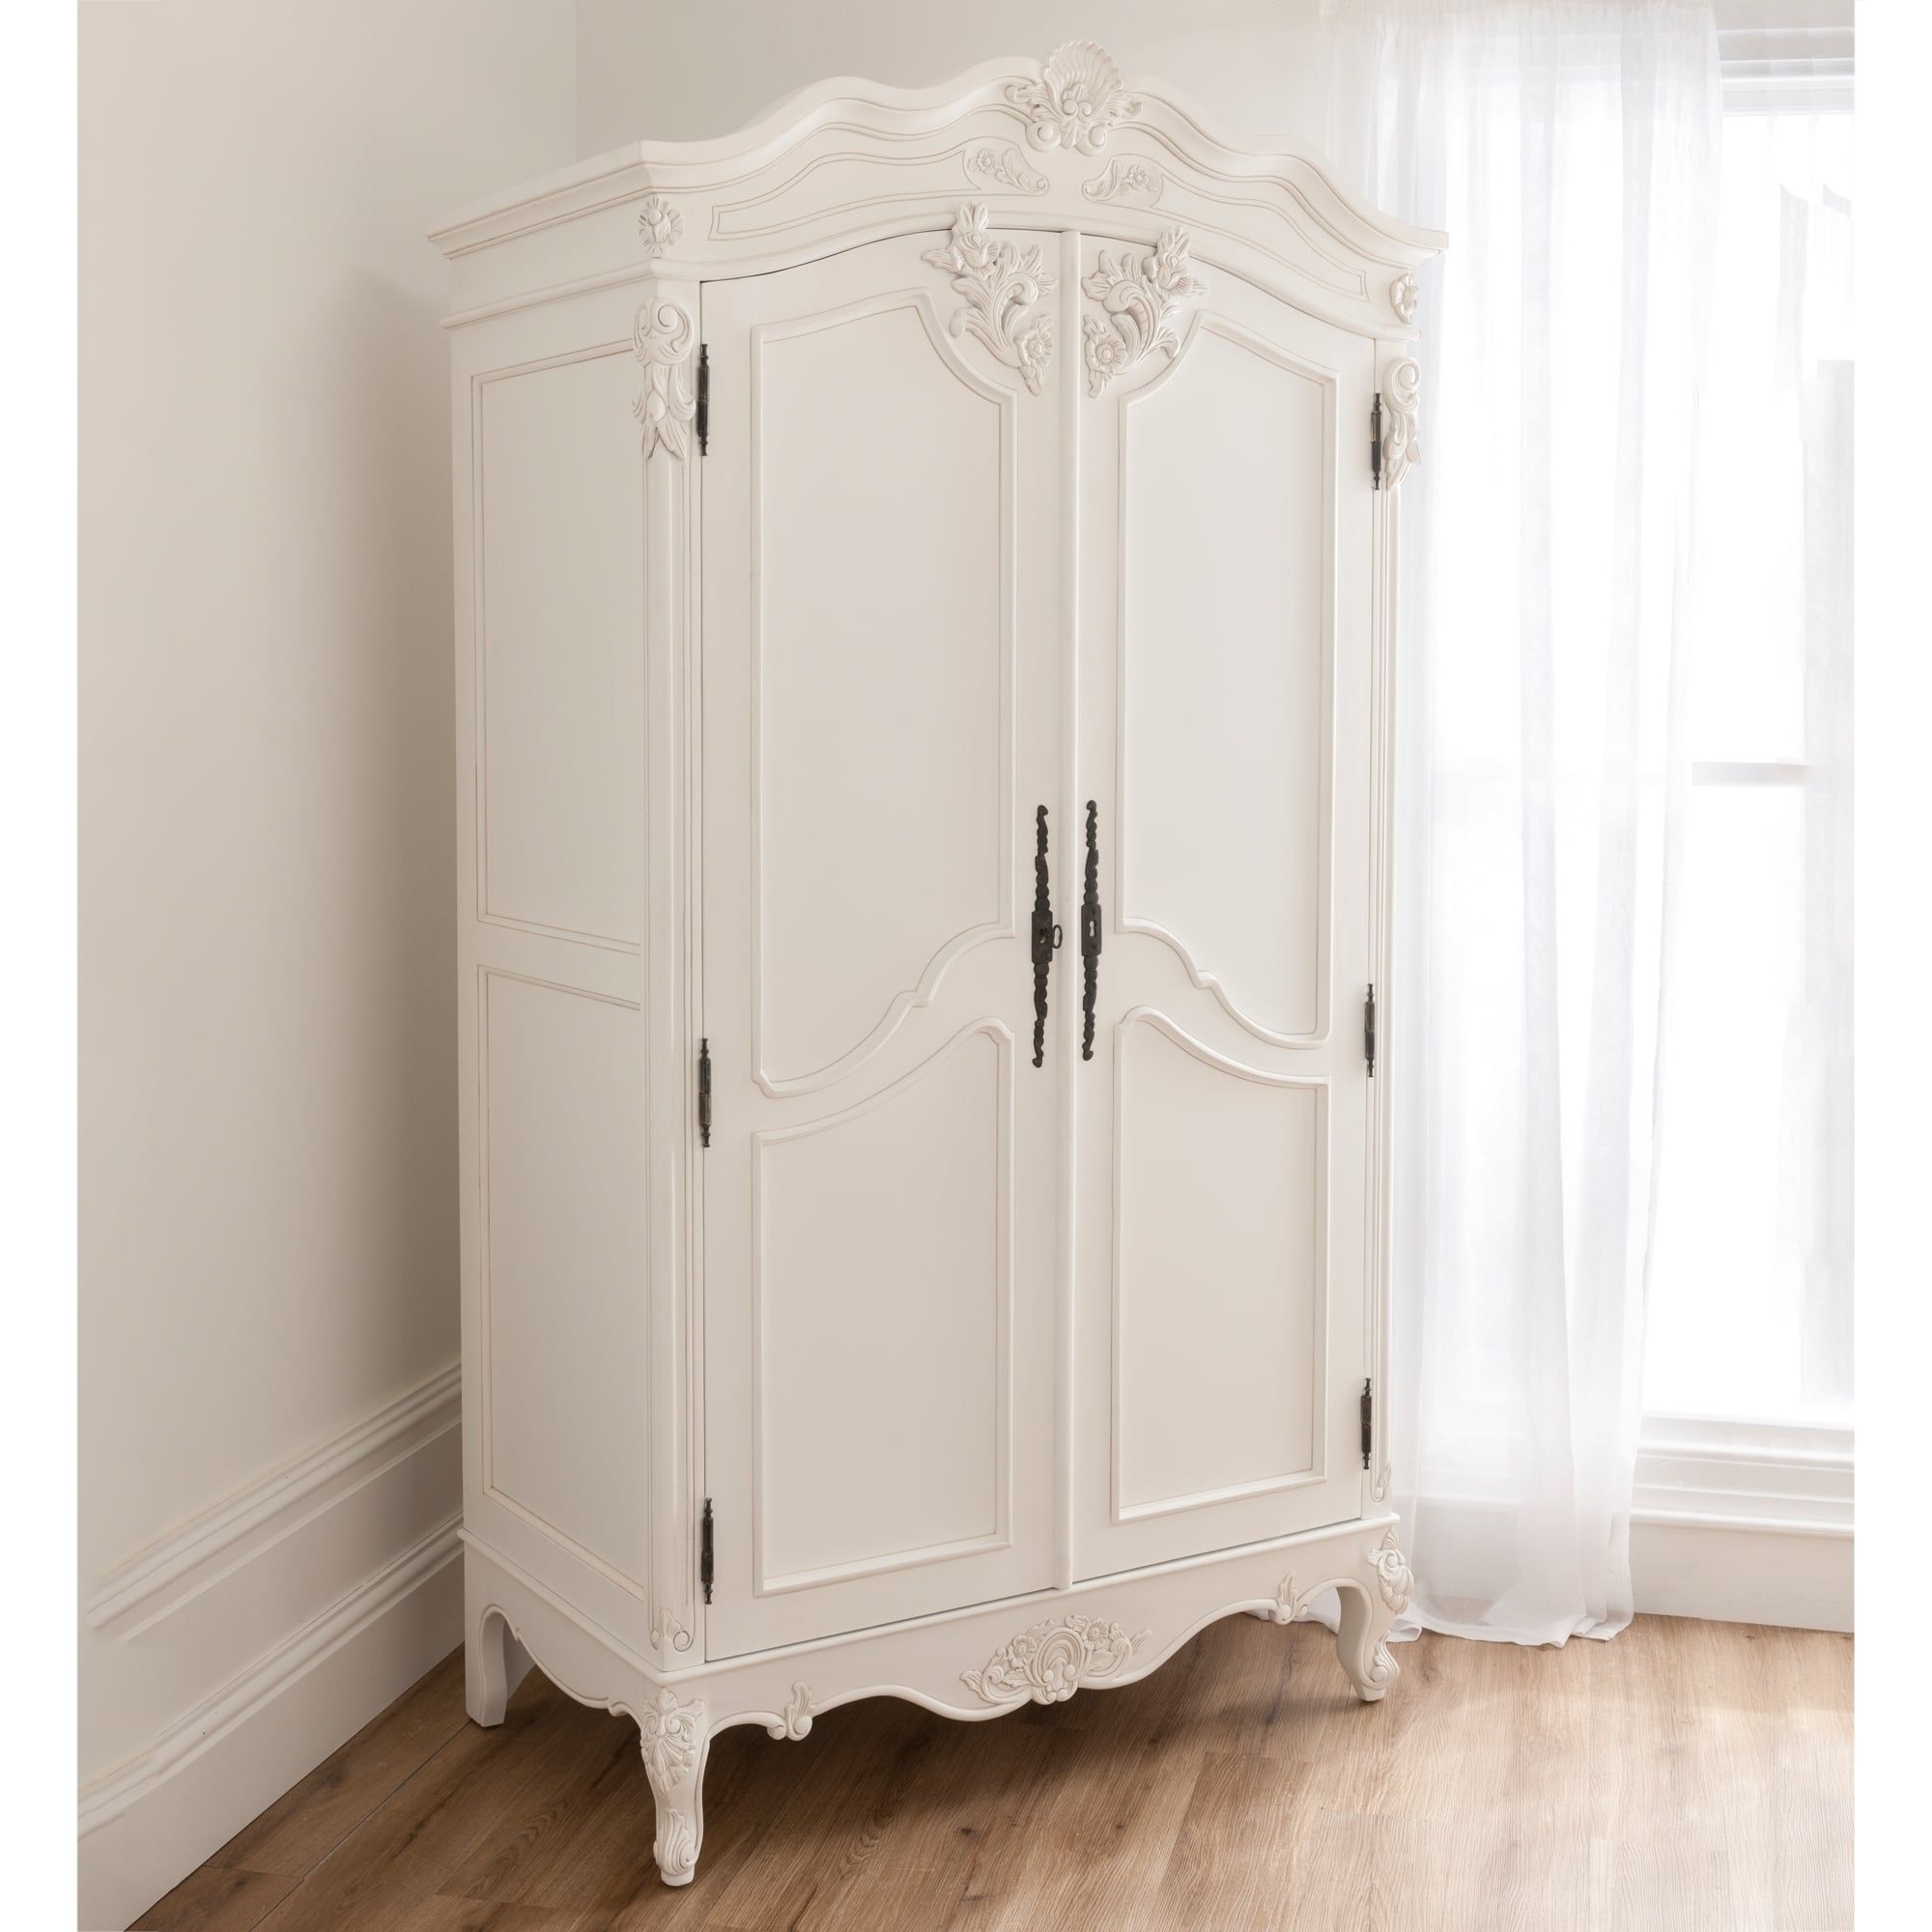 Baroque Antique French Wardrobe Is Available Online From Inside Most Recent French White Wardrobes (View 1 of 15)